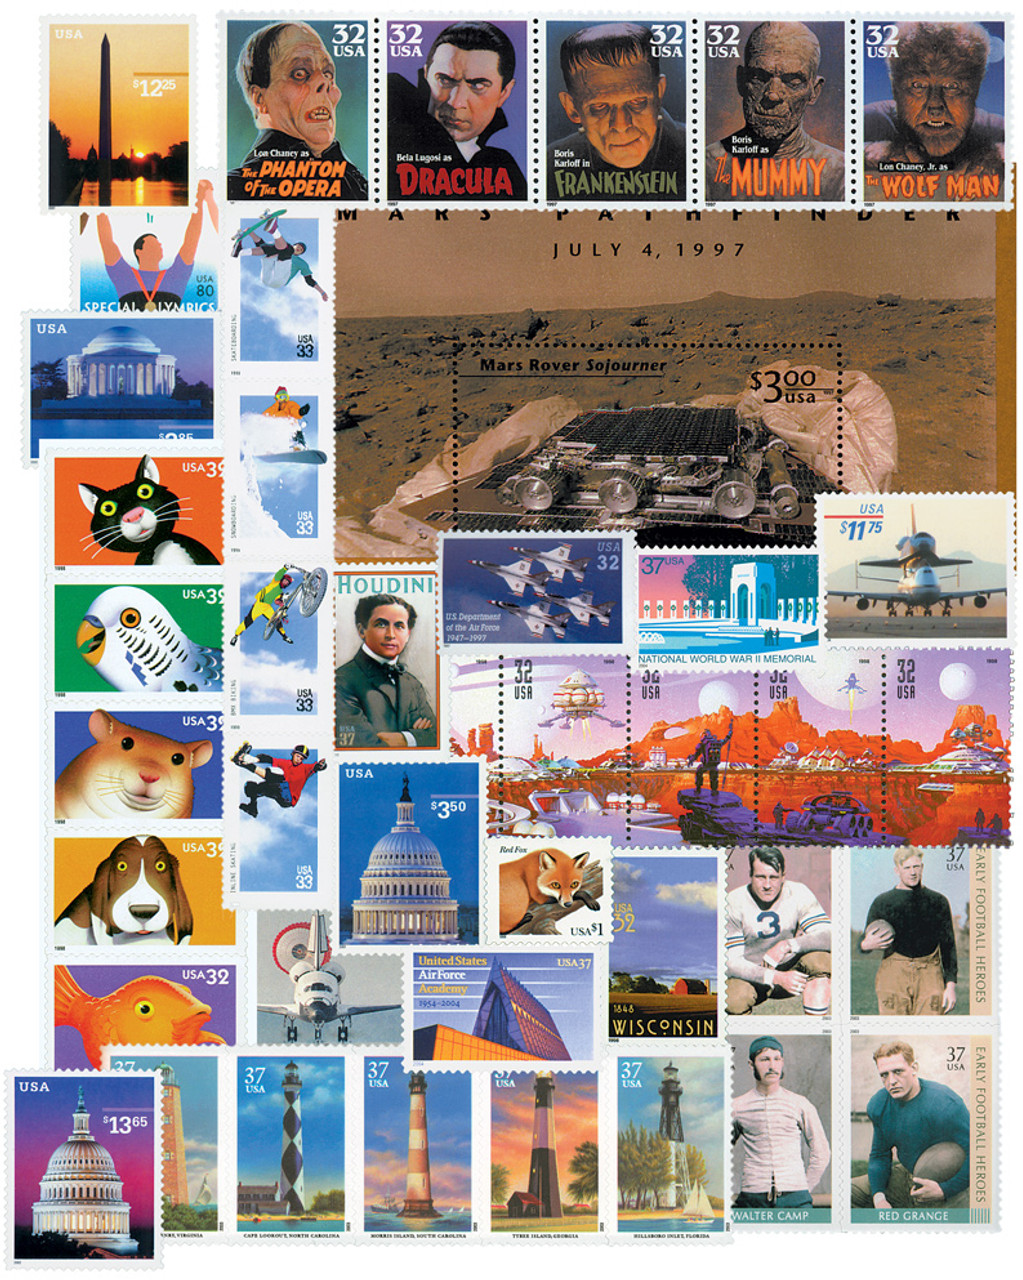 Bright Eyes Pets, Full Sheet of 20 x 32-Cent Postage Stamps, USA 1998,  Scott 3230-34